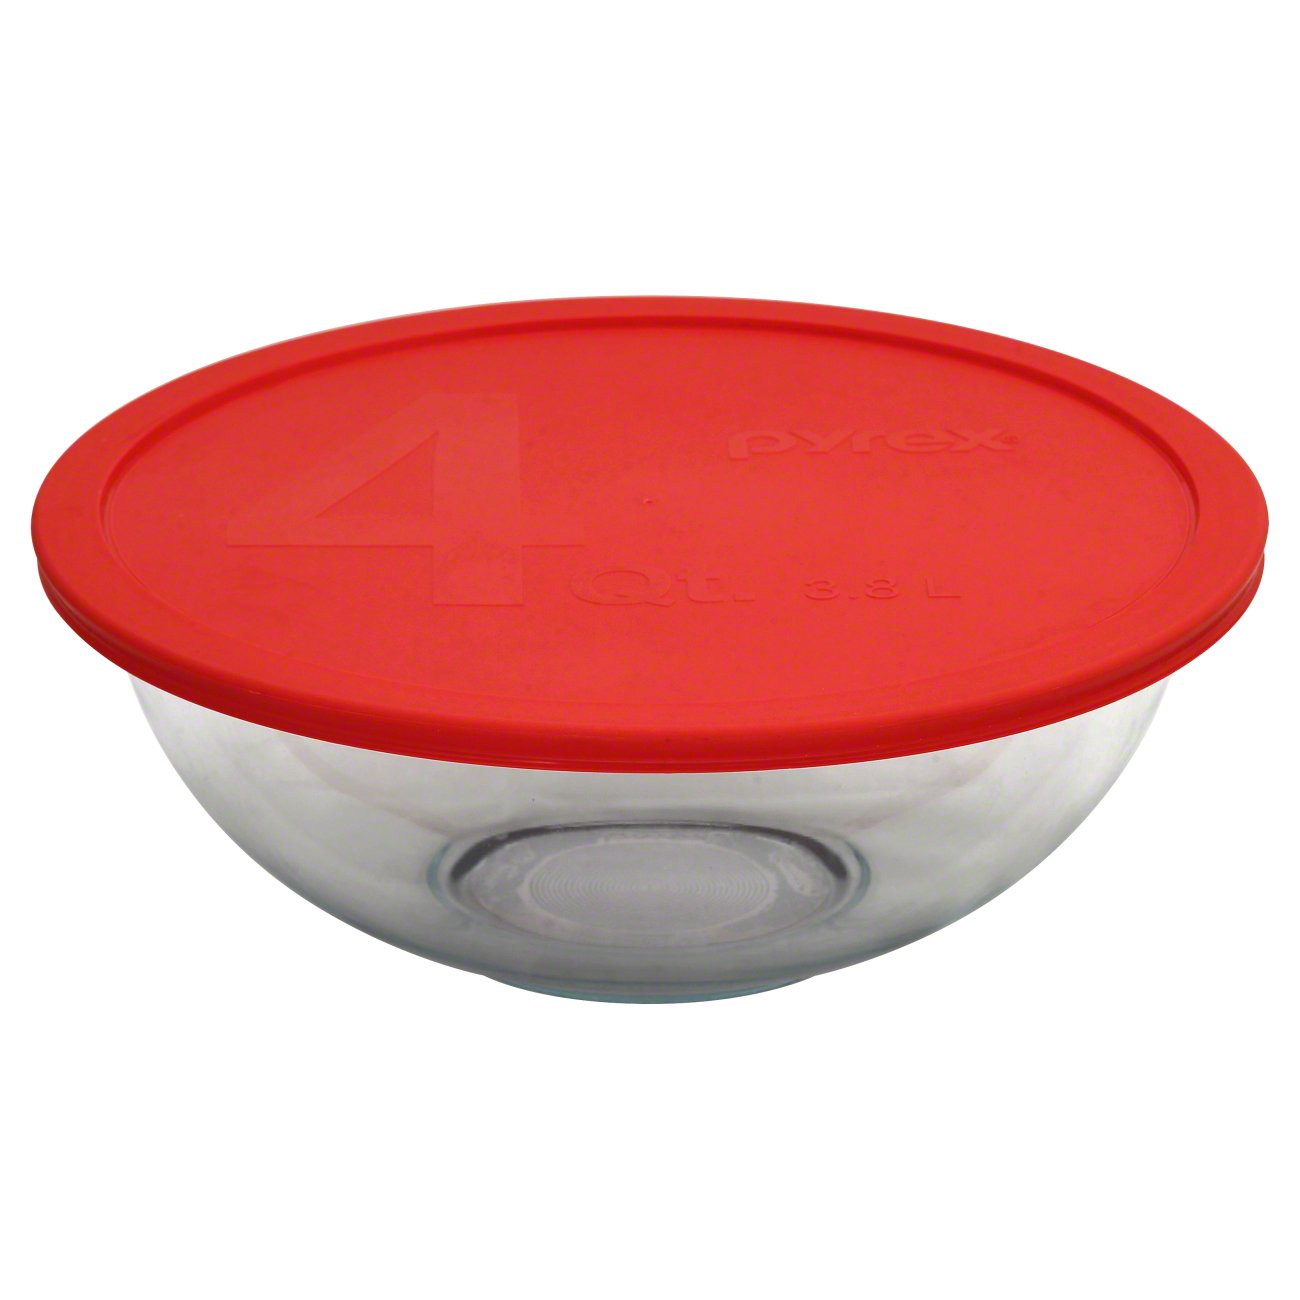 Pyrex Smart Essentials Mixing Bowl with Red Lid - Shop Mixing Bowls at H-E-B